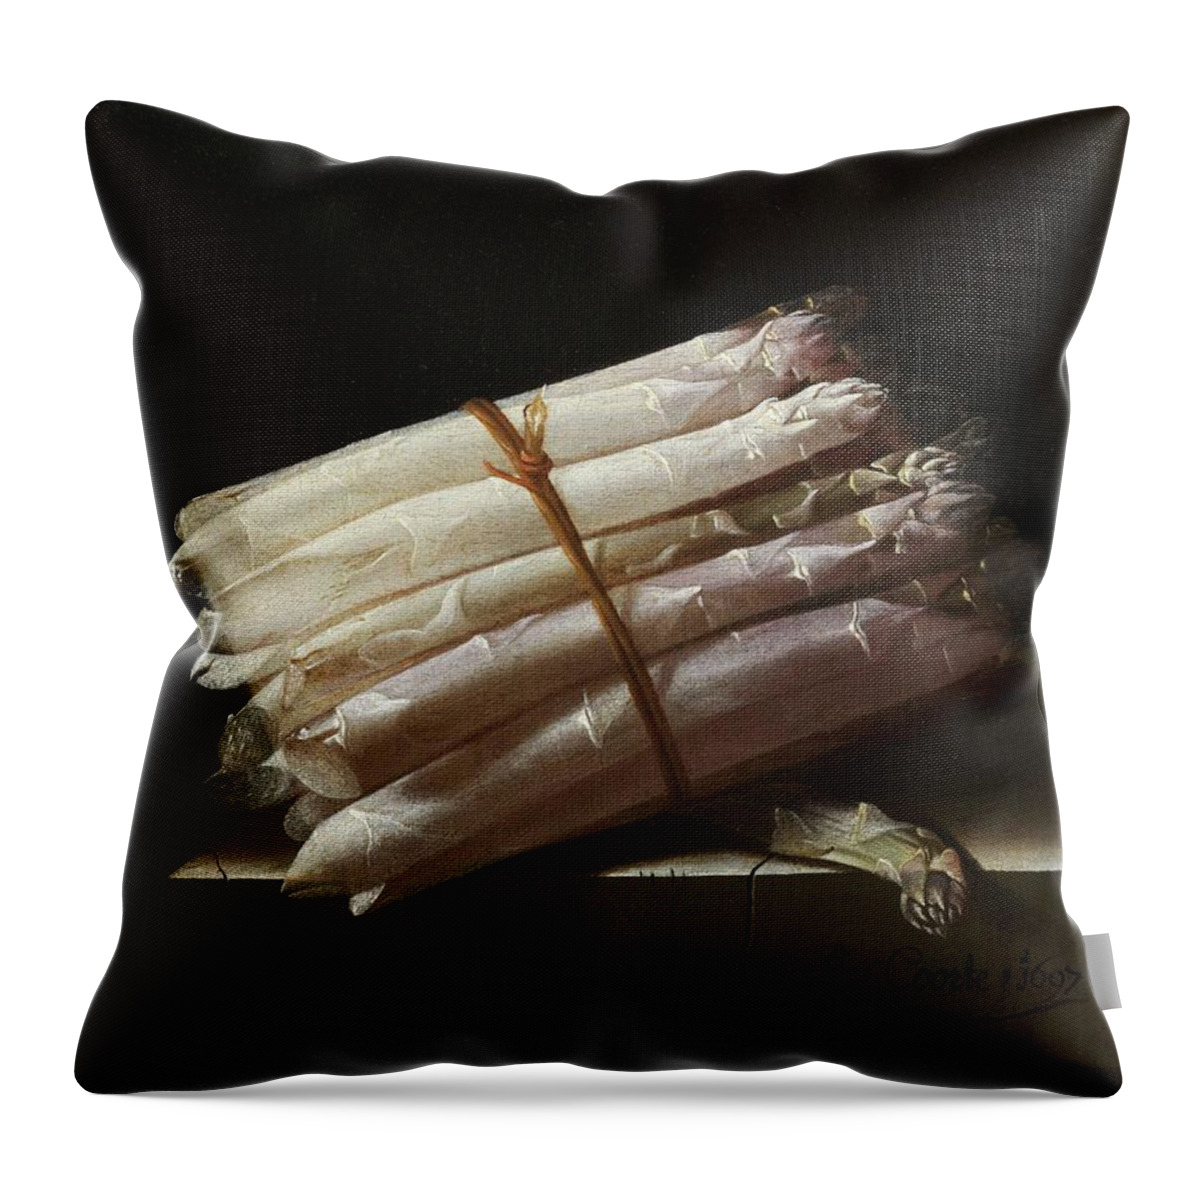 Still Life Throw Pillow featuring the painting Still Life With Asparagus by Adriaen Coorte